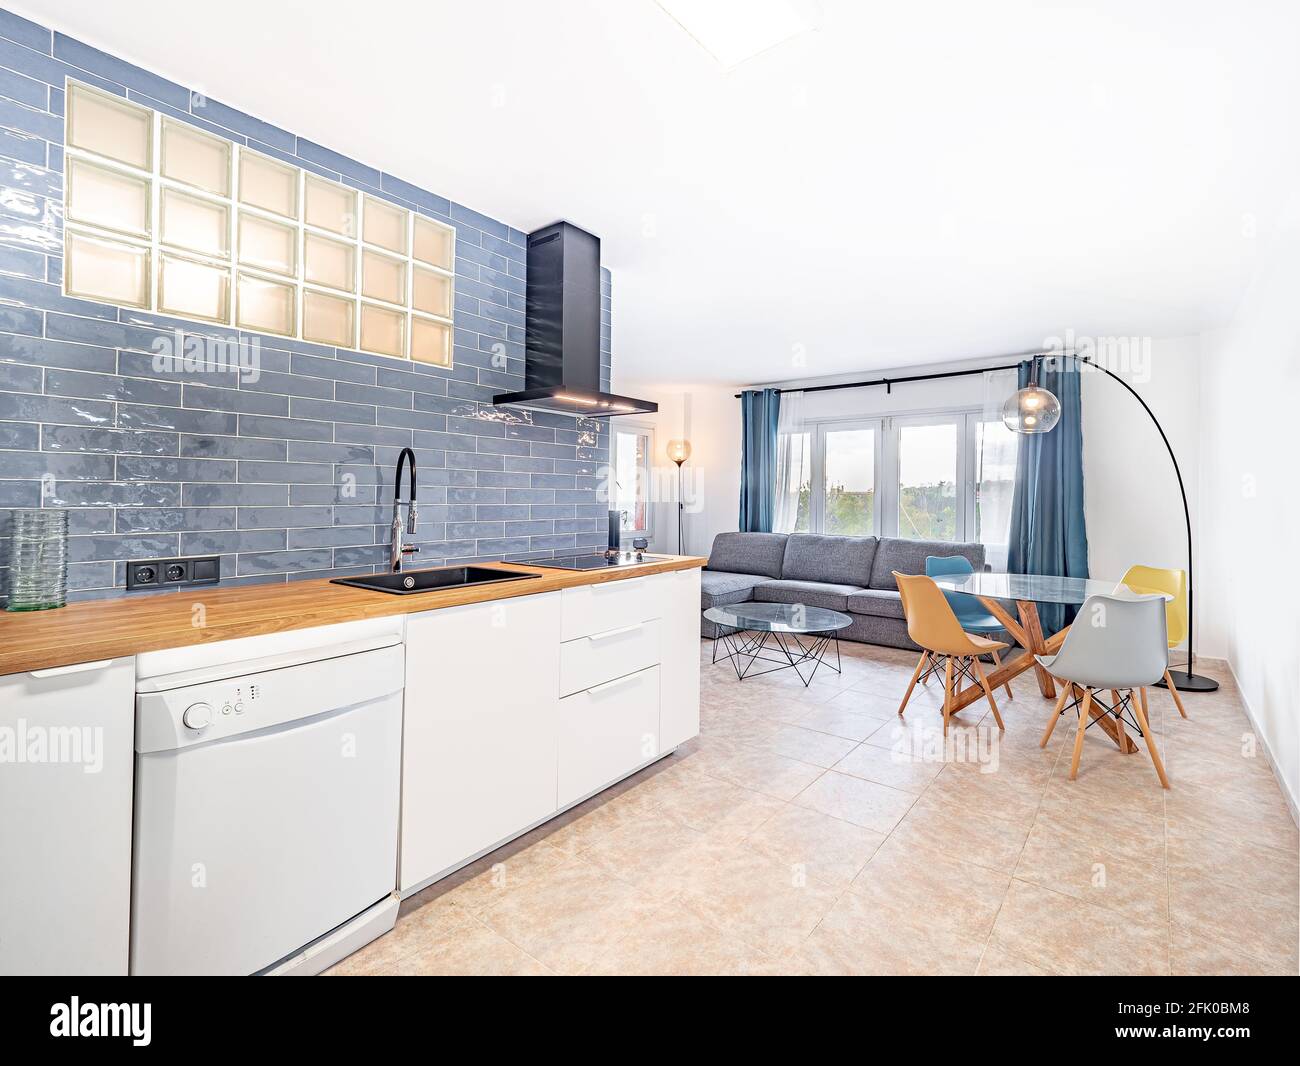 https://c8.alamy.com/comp/2FK0BM8/open-space-kitchen-with-white-cabinets-and-blue-tiles-next-to-the-living-roomspacious-modern-fully-equipped-appliance-interior-with-wooden-desk-brig-2FK0BM8.jpg